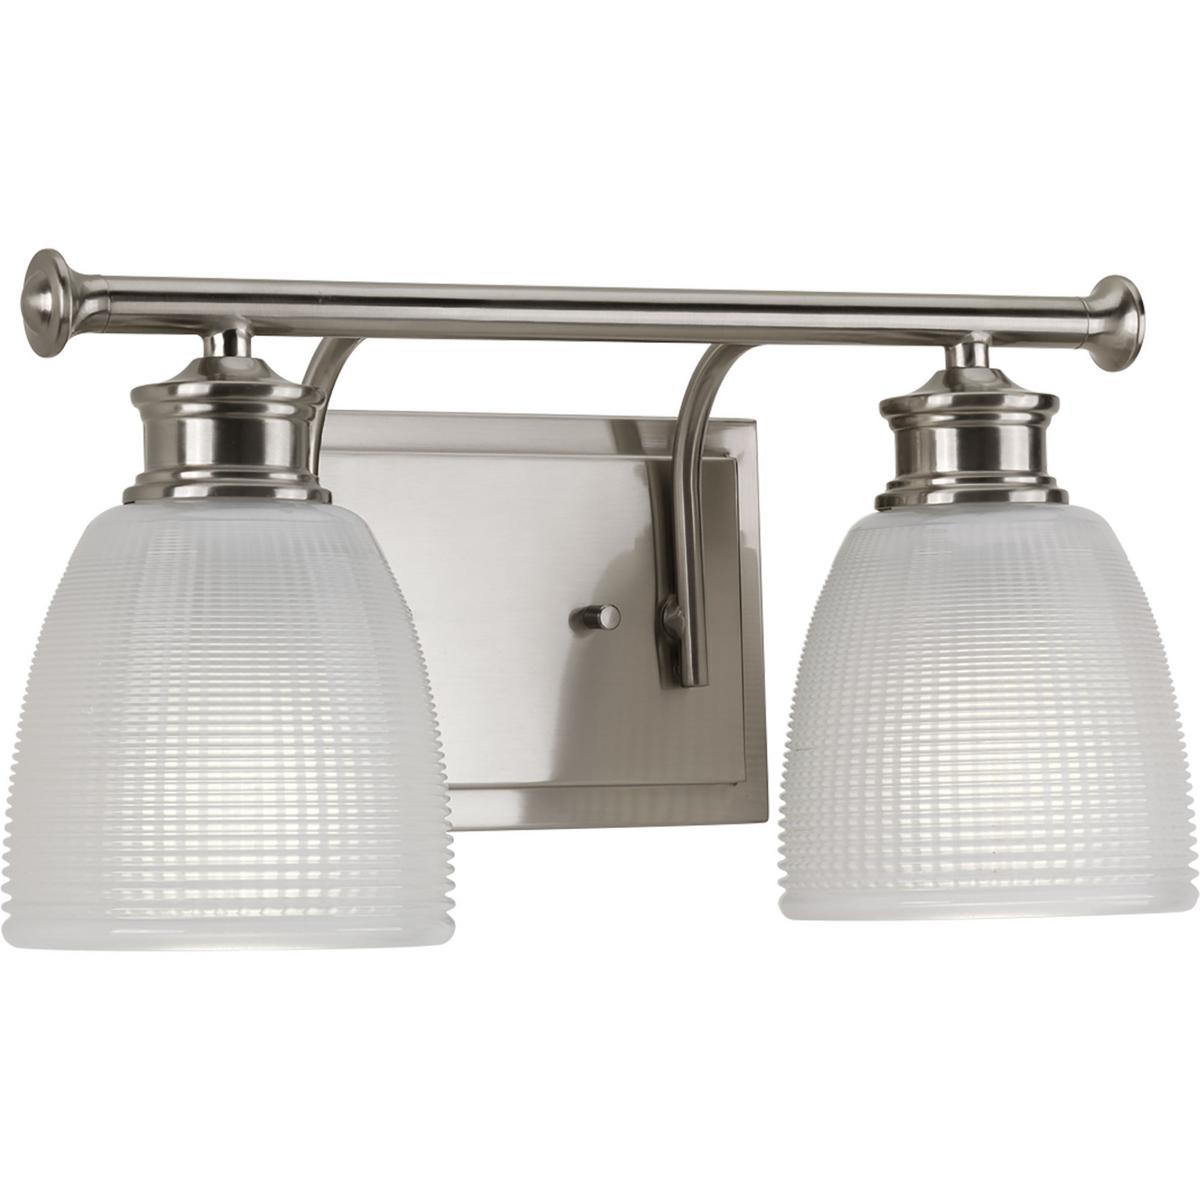 Hubbell P2116-09 Two-light bath from the Lucky Collection, with a distinctive design that evokes a vintage flair with finely crafted details. Light is beautifully illuminated through double prismatic frosted glass shades. Brushed Nickel finish.  ; Ideal for a bathroom and